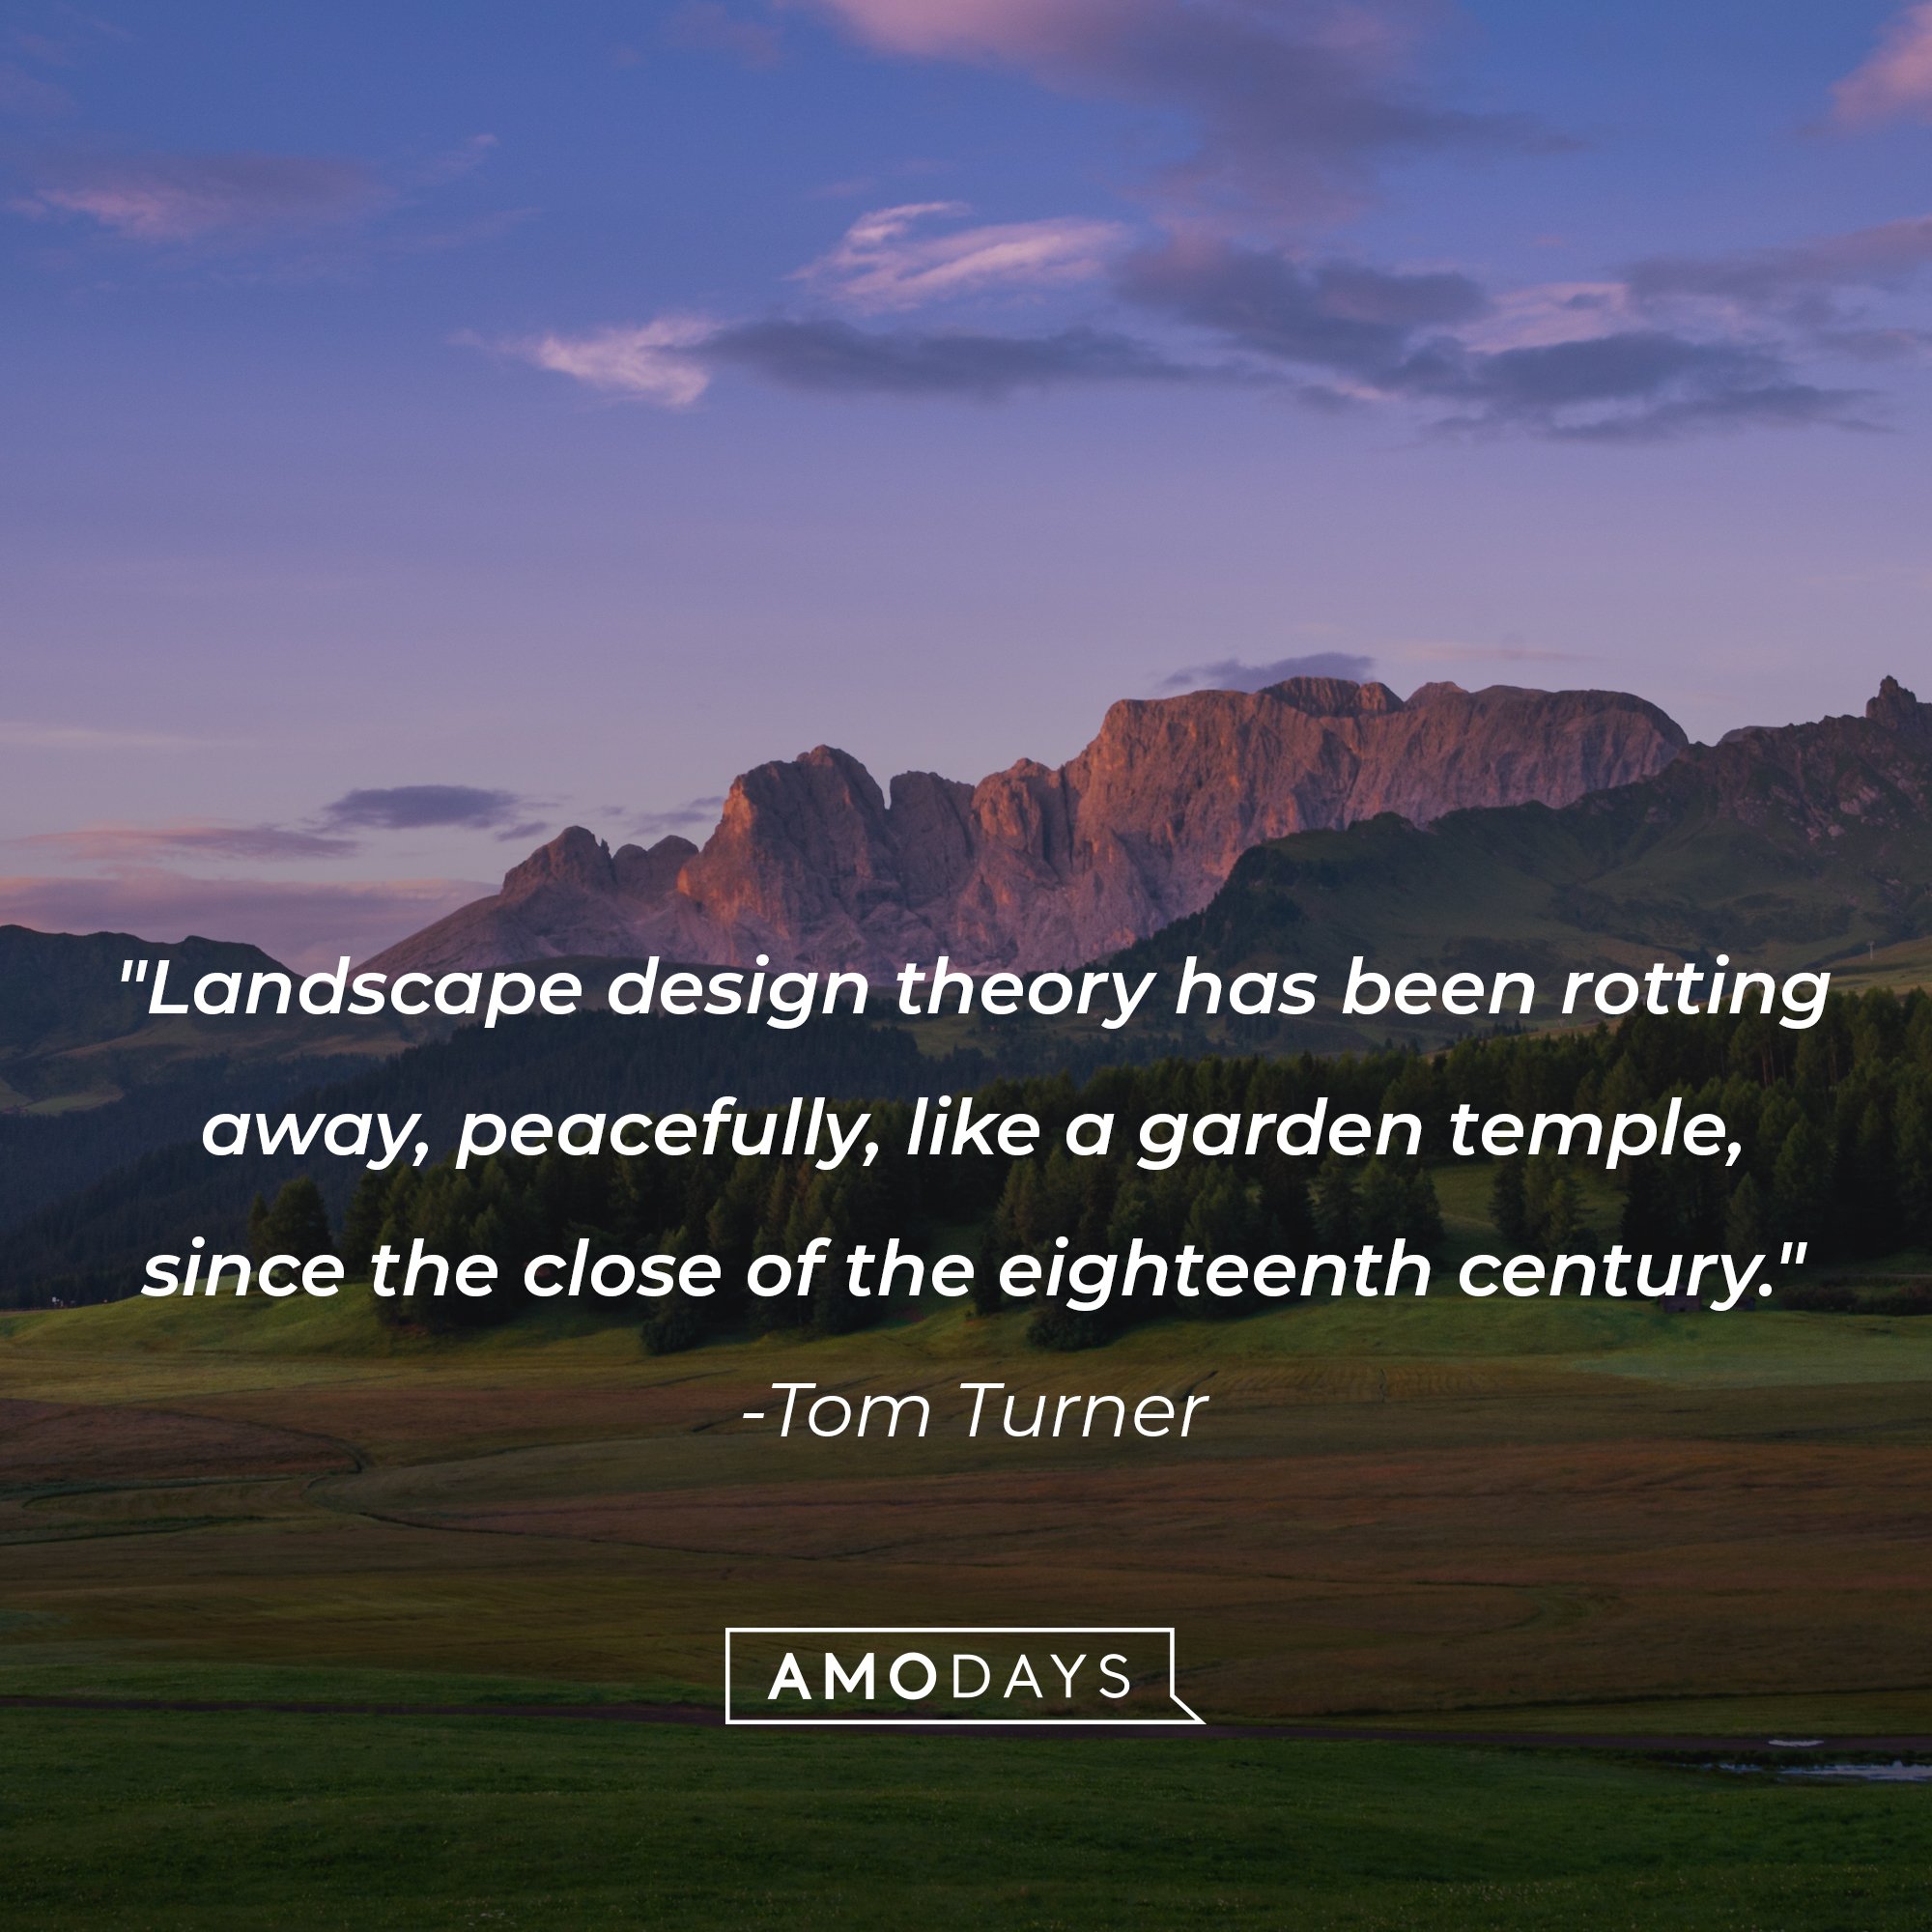 Tom Turner's quote: "Landscape design theory has been rotting away, peacefully, like a garden temple, since the close of the eighteenth century." | Image: AmoDays